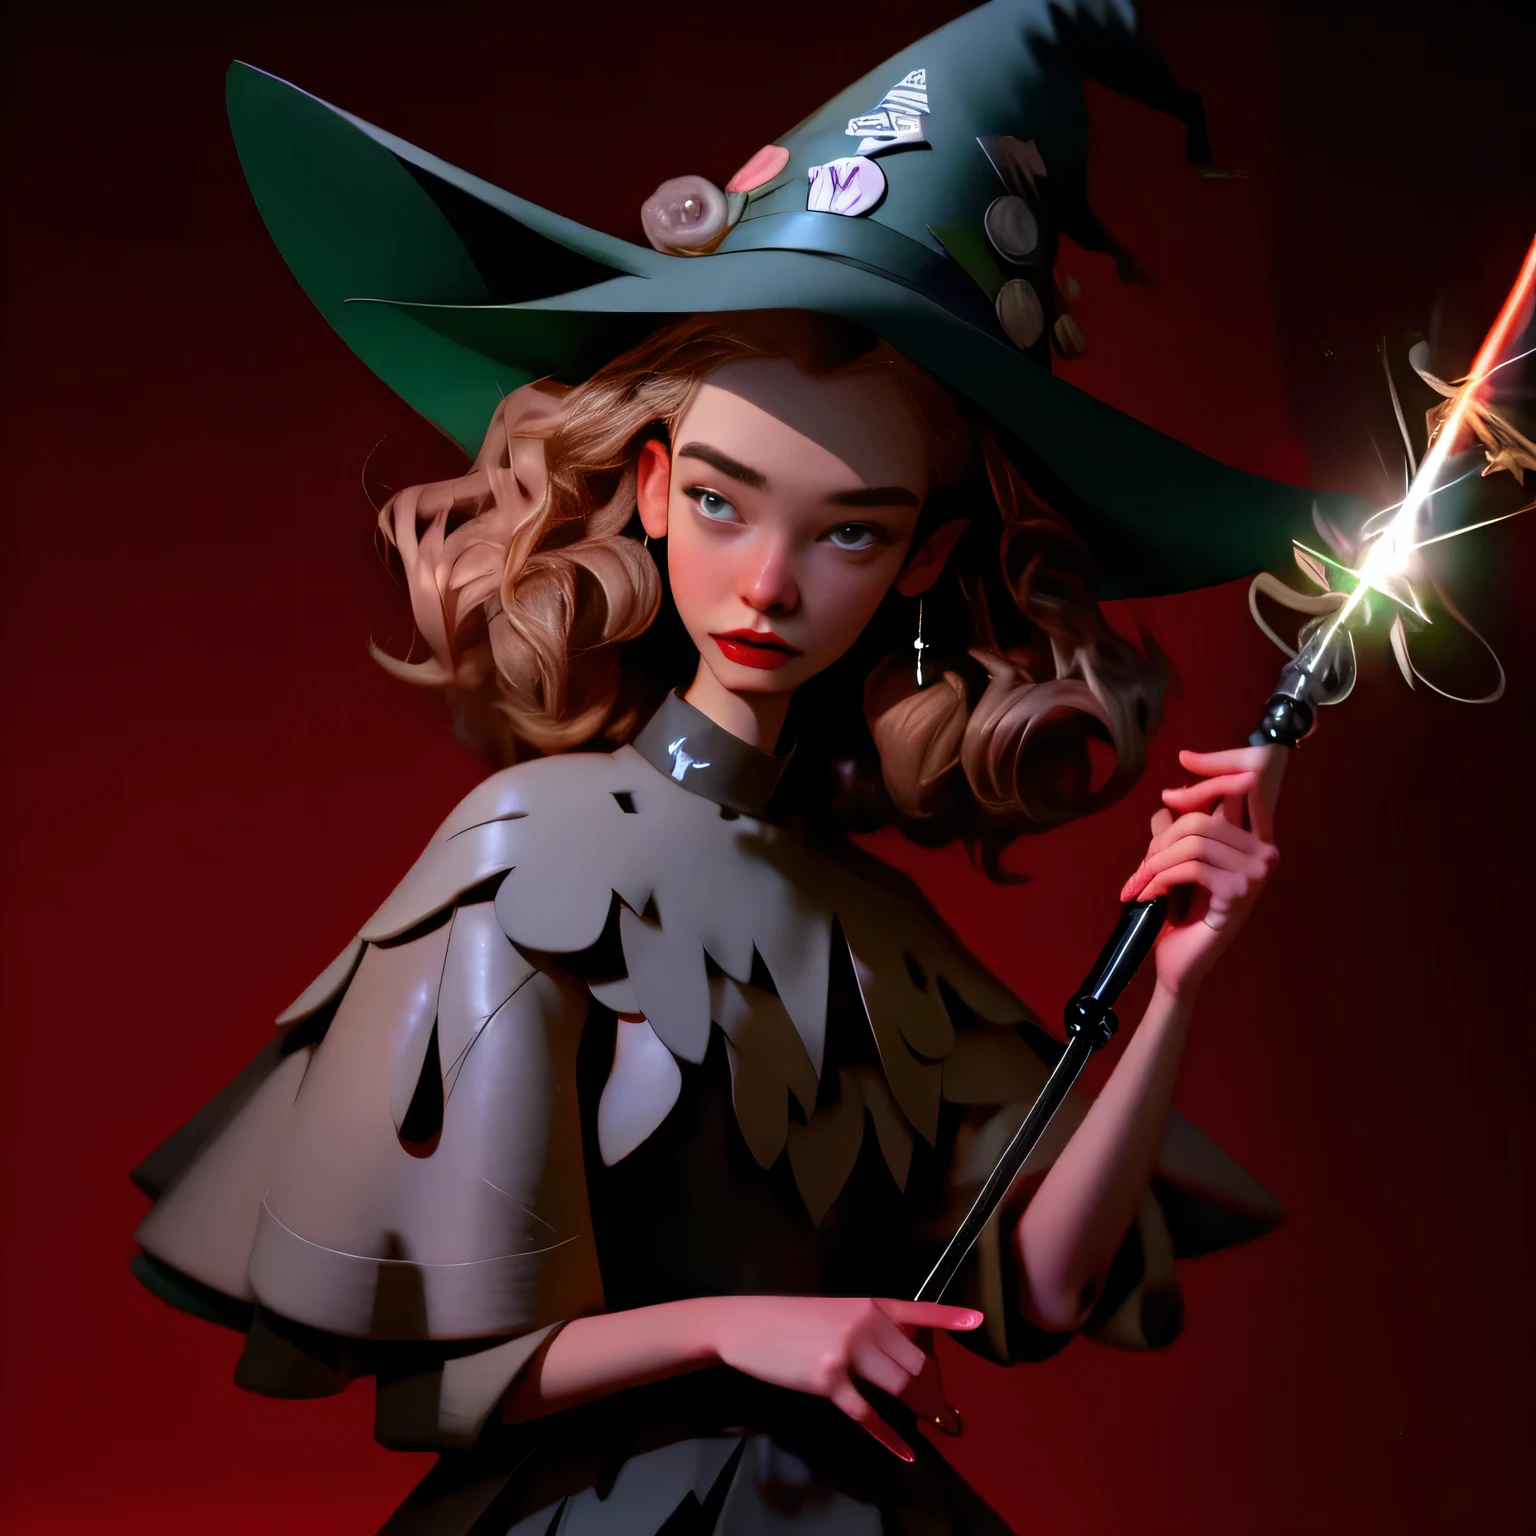 there is a woman holding a pair of scissors in her hand, holding a syringe!!, holding a wand, holding a scepter, holding a magic needle, holding a magic staff, holding wand, holding a magic wand, holding syringe, holding an activated lightsaber, holding a syringe, as a claymation character, witchy, witch